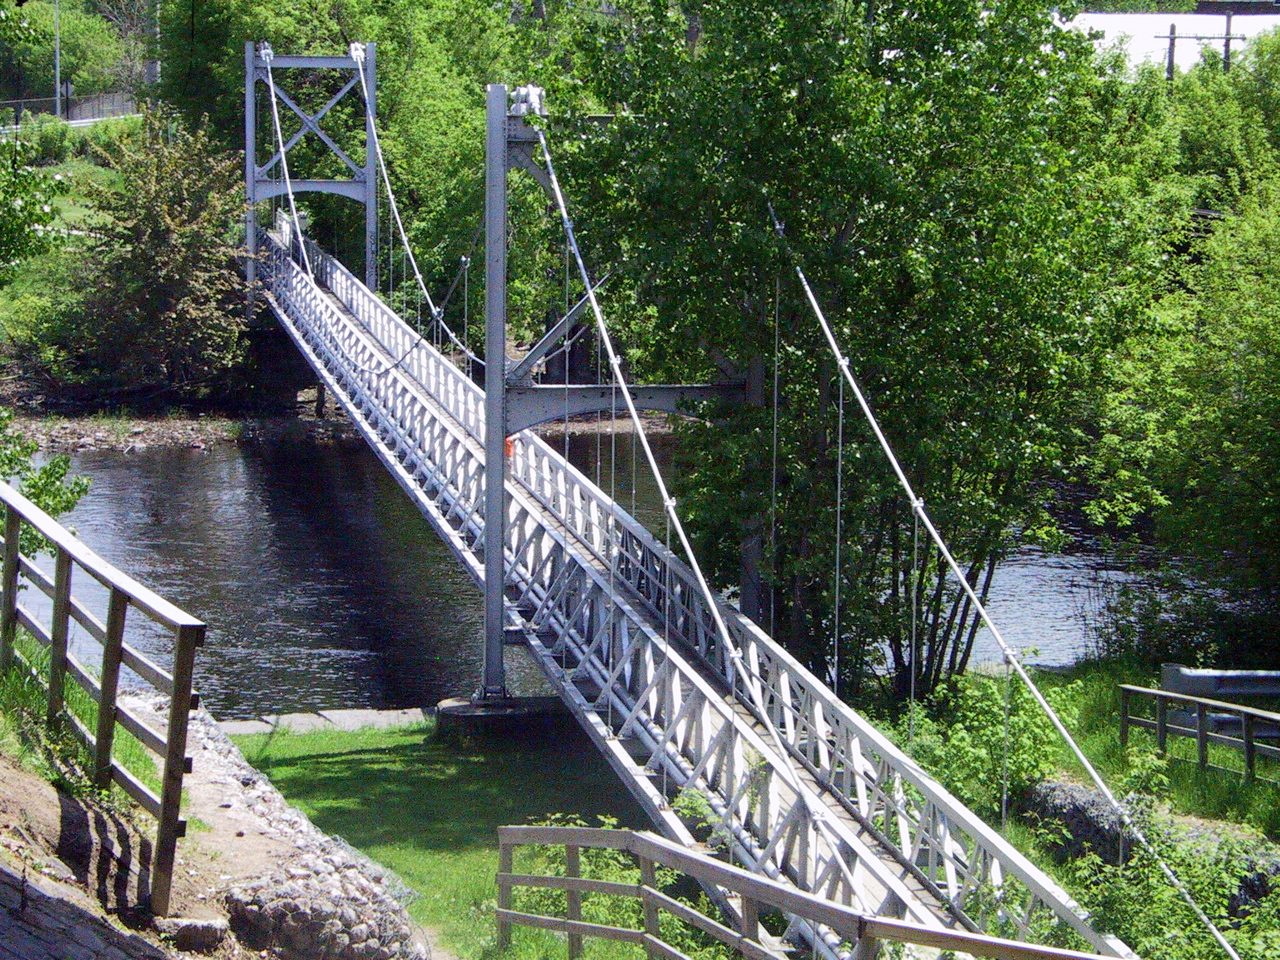 a bridge going over a body of water next to trees